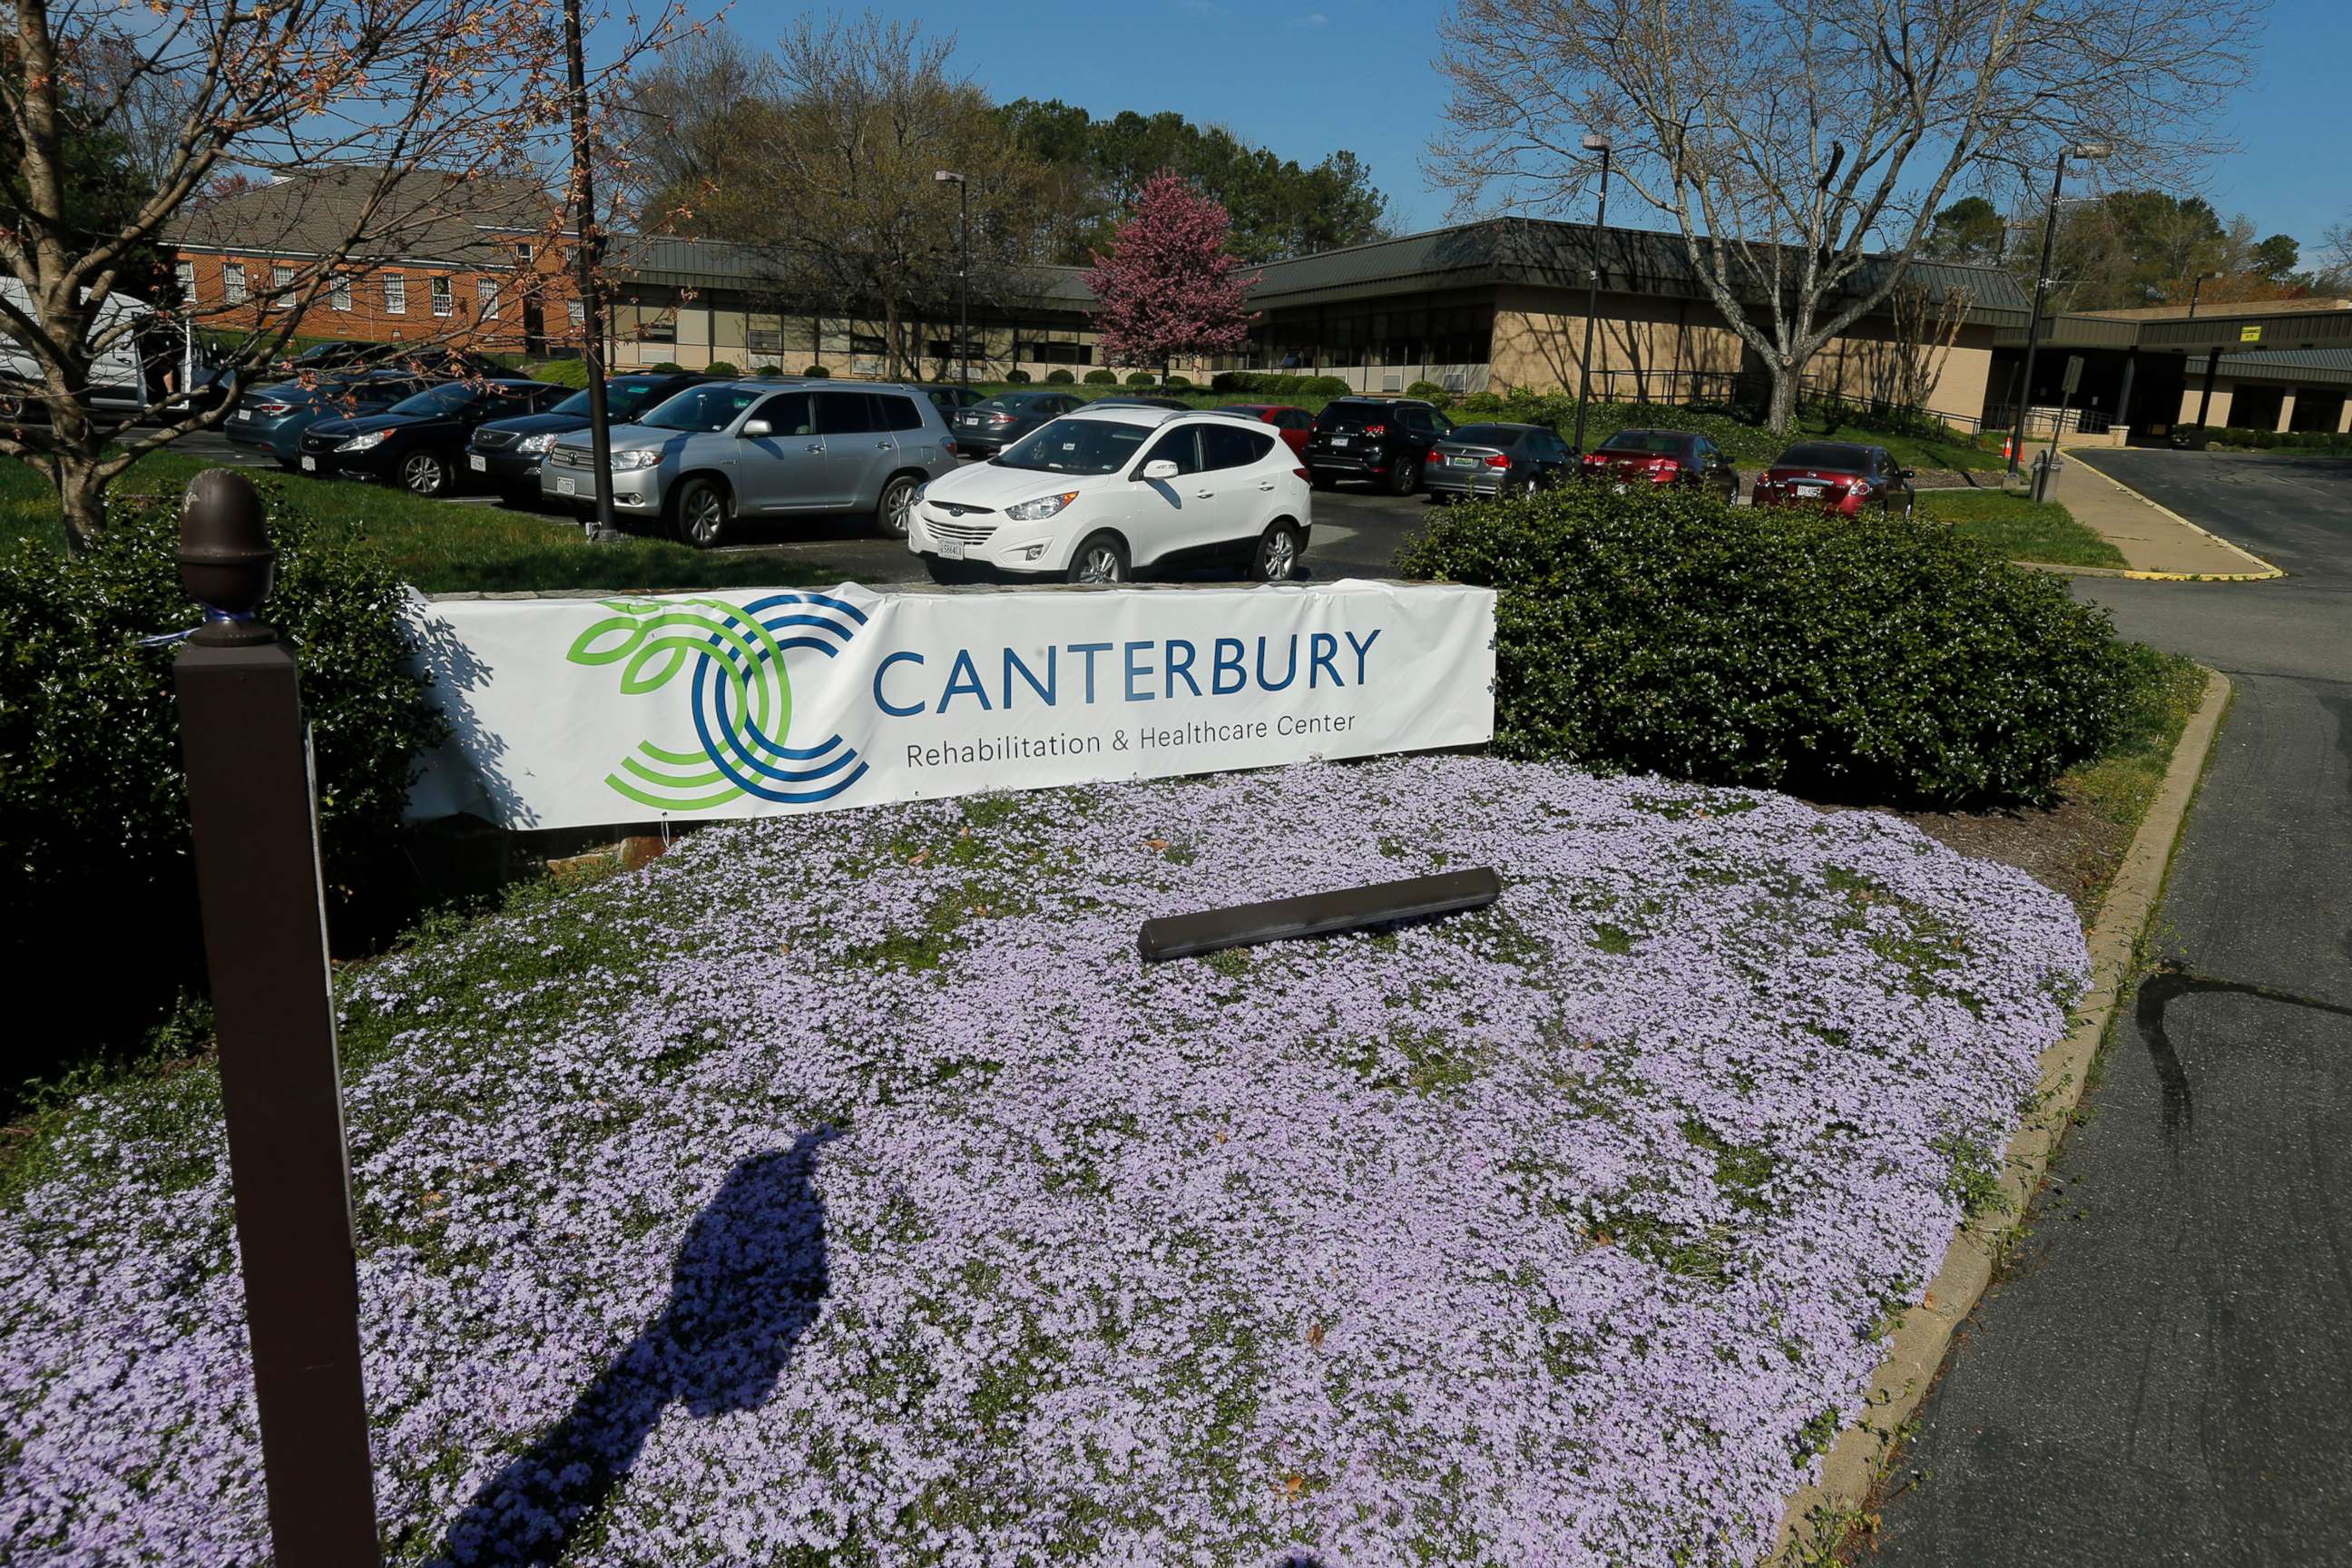 PHOTO: In this March 27, 2020, file photo, the Canterbury Rehabilitation & Healthcare Center in Richmond, Va. is shown.